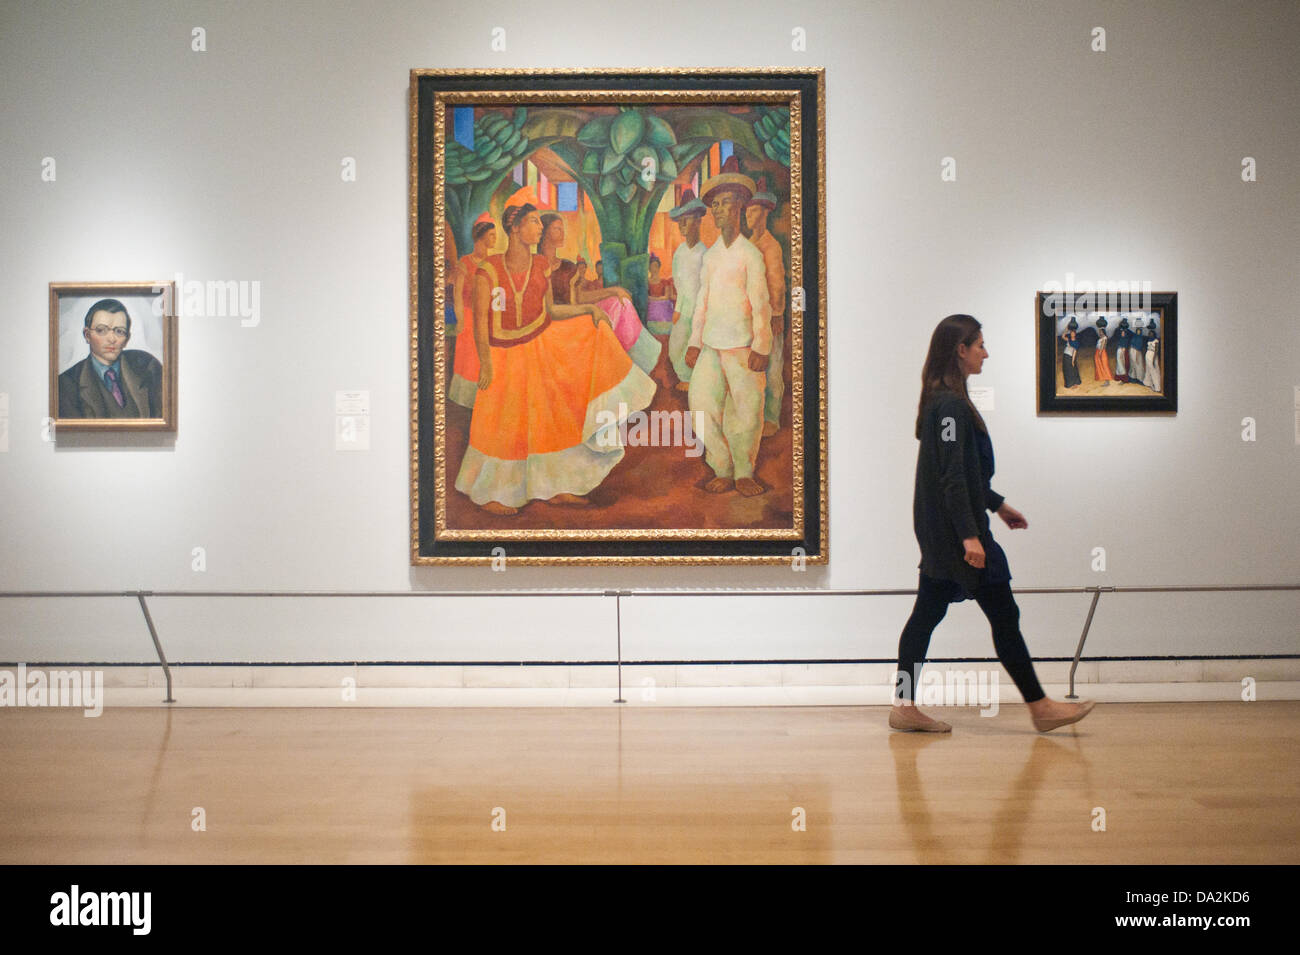 London, UK - 2 July 2013: A Royal Academy of Arts employee walks past a work by Diego Rivera entitled 'Dance in Tehuantepec, 1928' at the exhibition 'Mexico: A Revolution in Art, 1910–1940' which opens on the 6th of July. The show features over 120 paintings and photographs and examines the intense period of artistic creativity that took place in Mexico at the beginning of the 20th century. Credit:  Piero Cruciatti/Alamy Live News Stock Photo